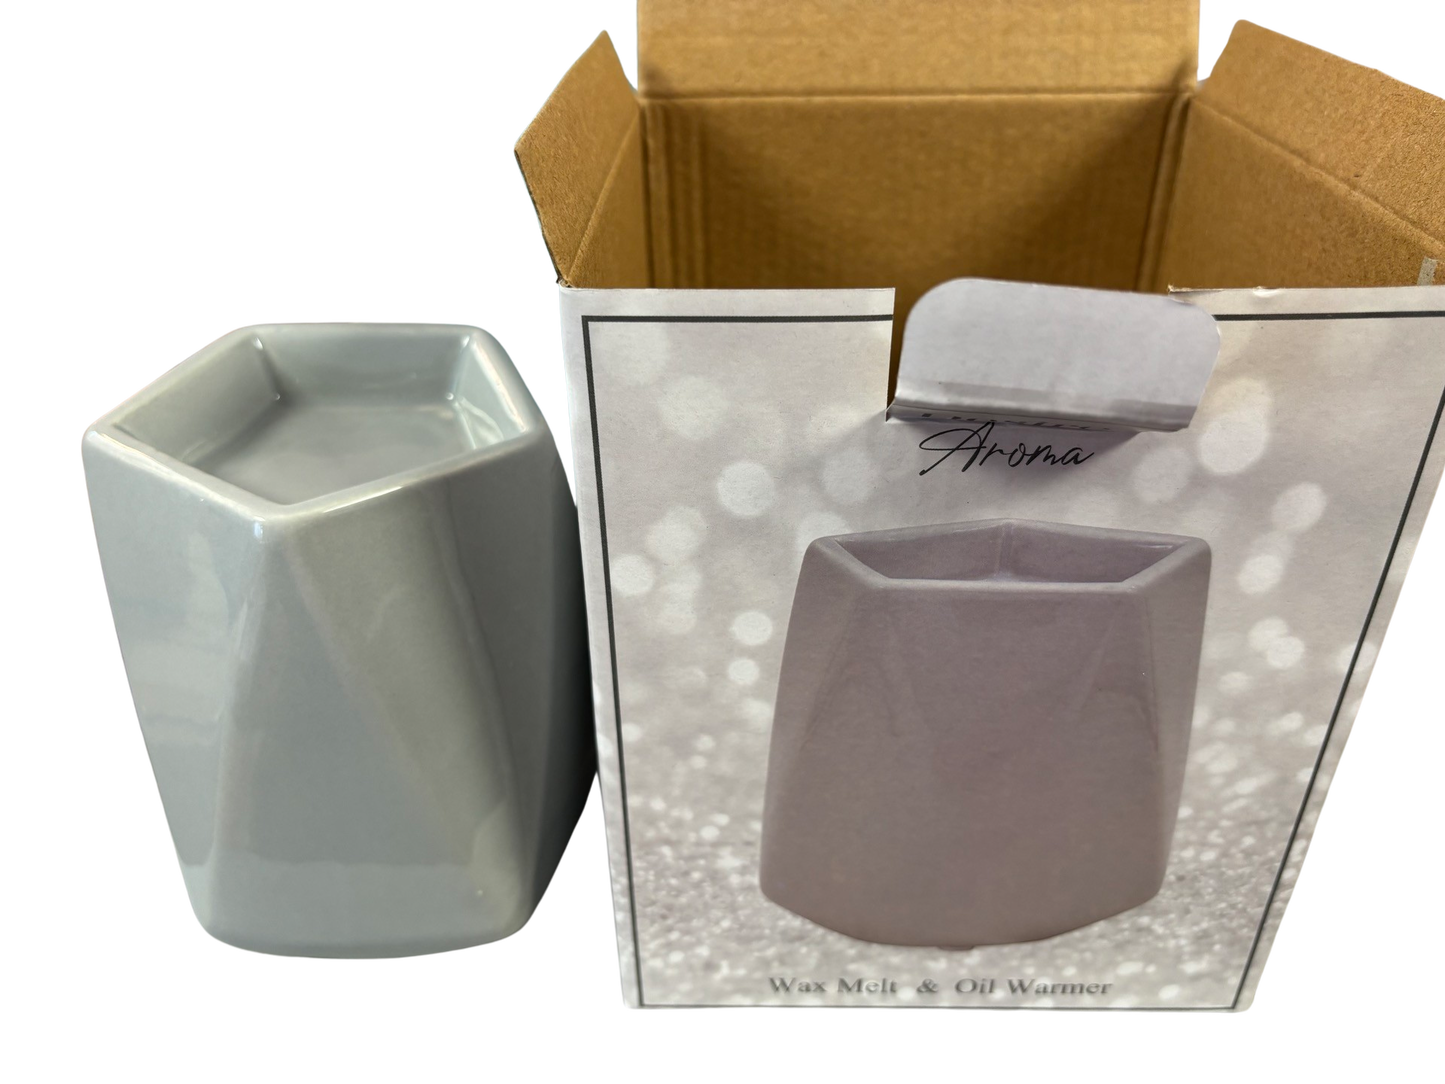 Grey Gloss Wax Melt & Oil Warmer by The Soap Gal x next to its packaging box displaying an image of the product, enhancing your home fragrance experience.